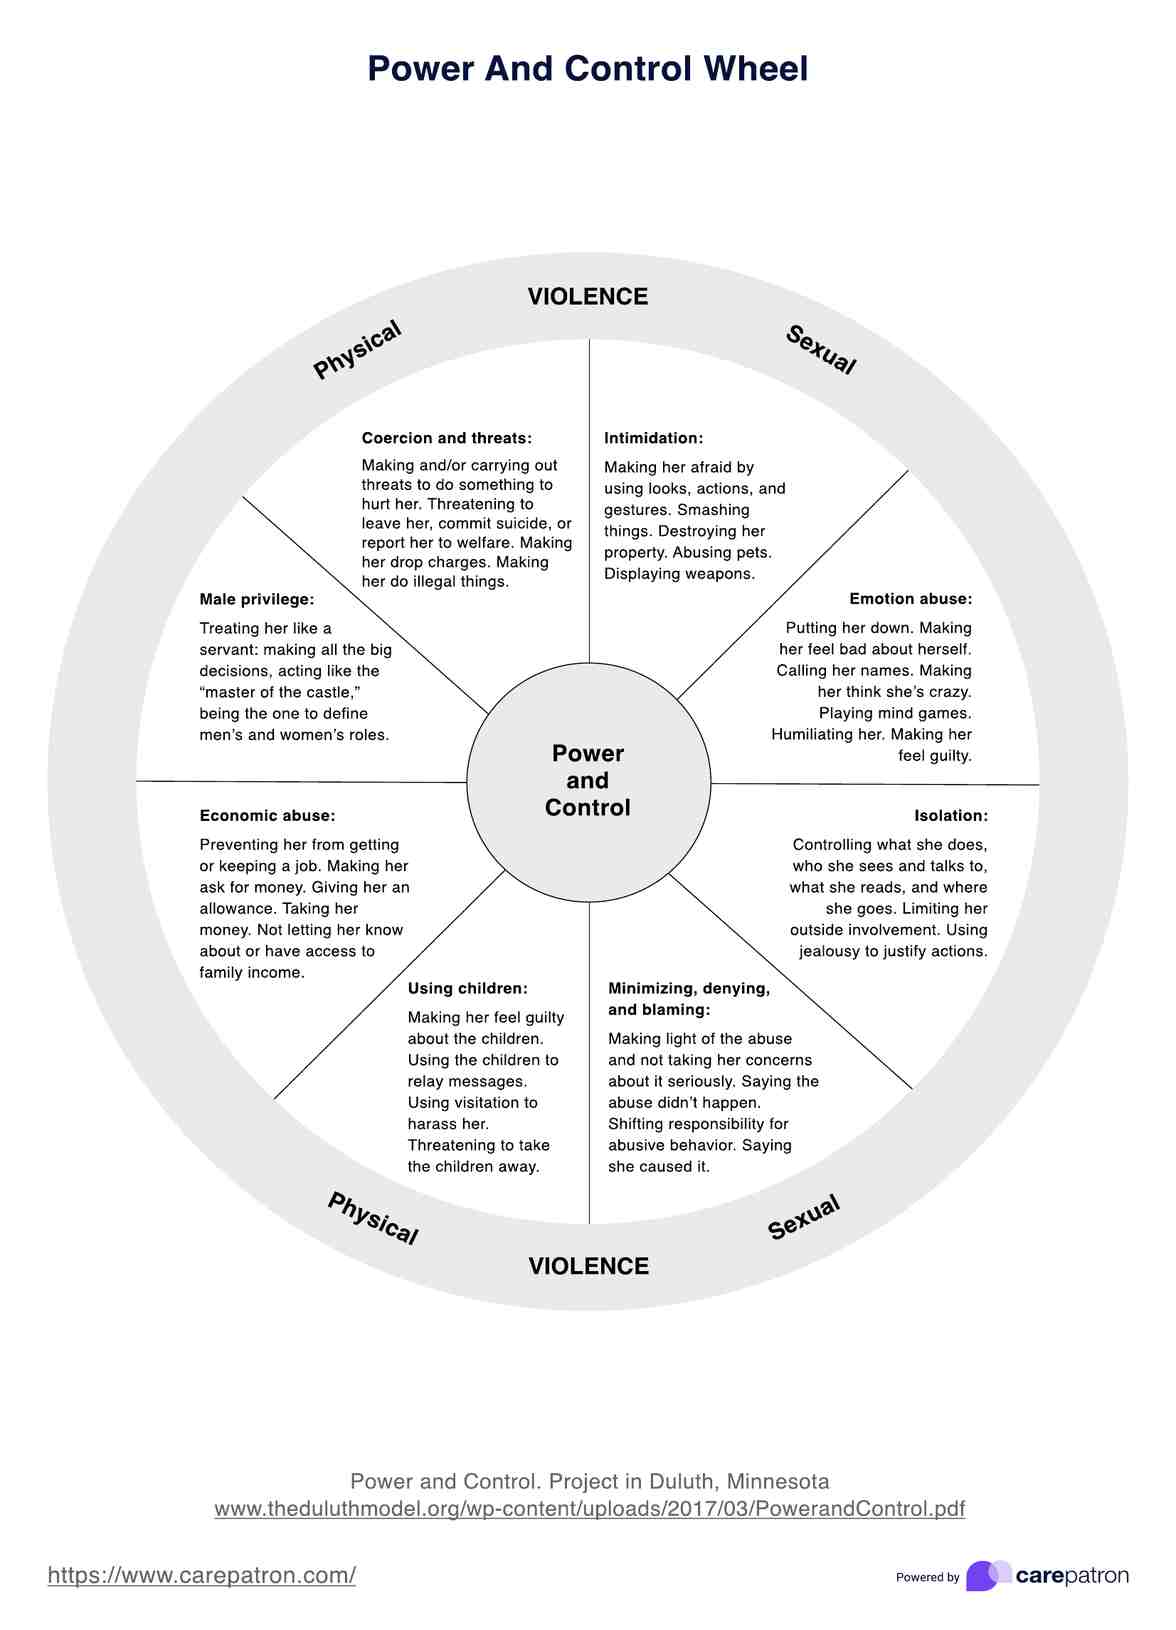 Power And Control Wheel PDF Example